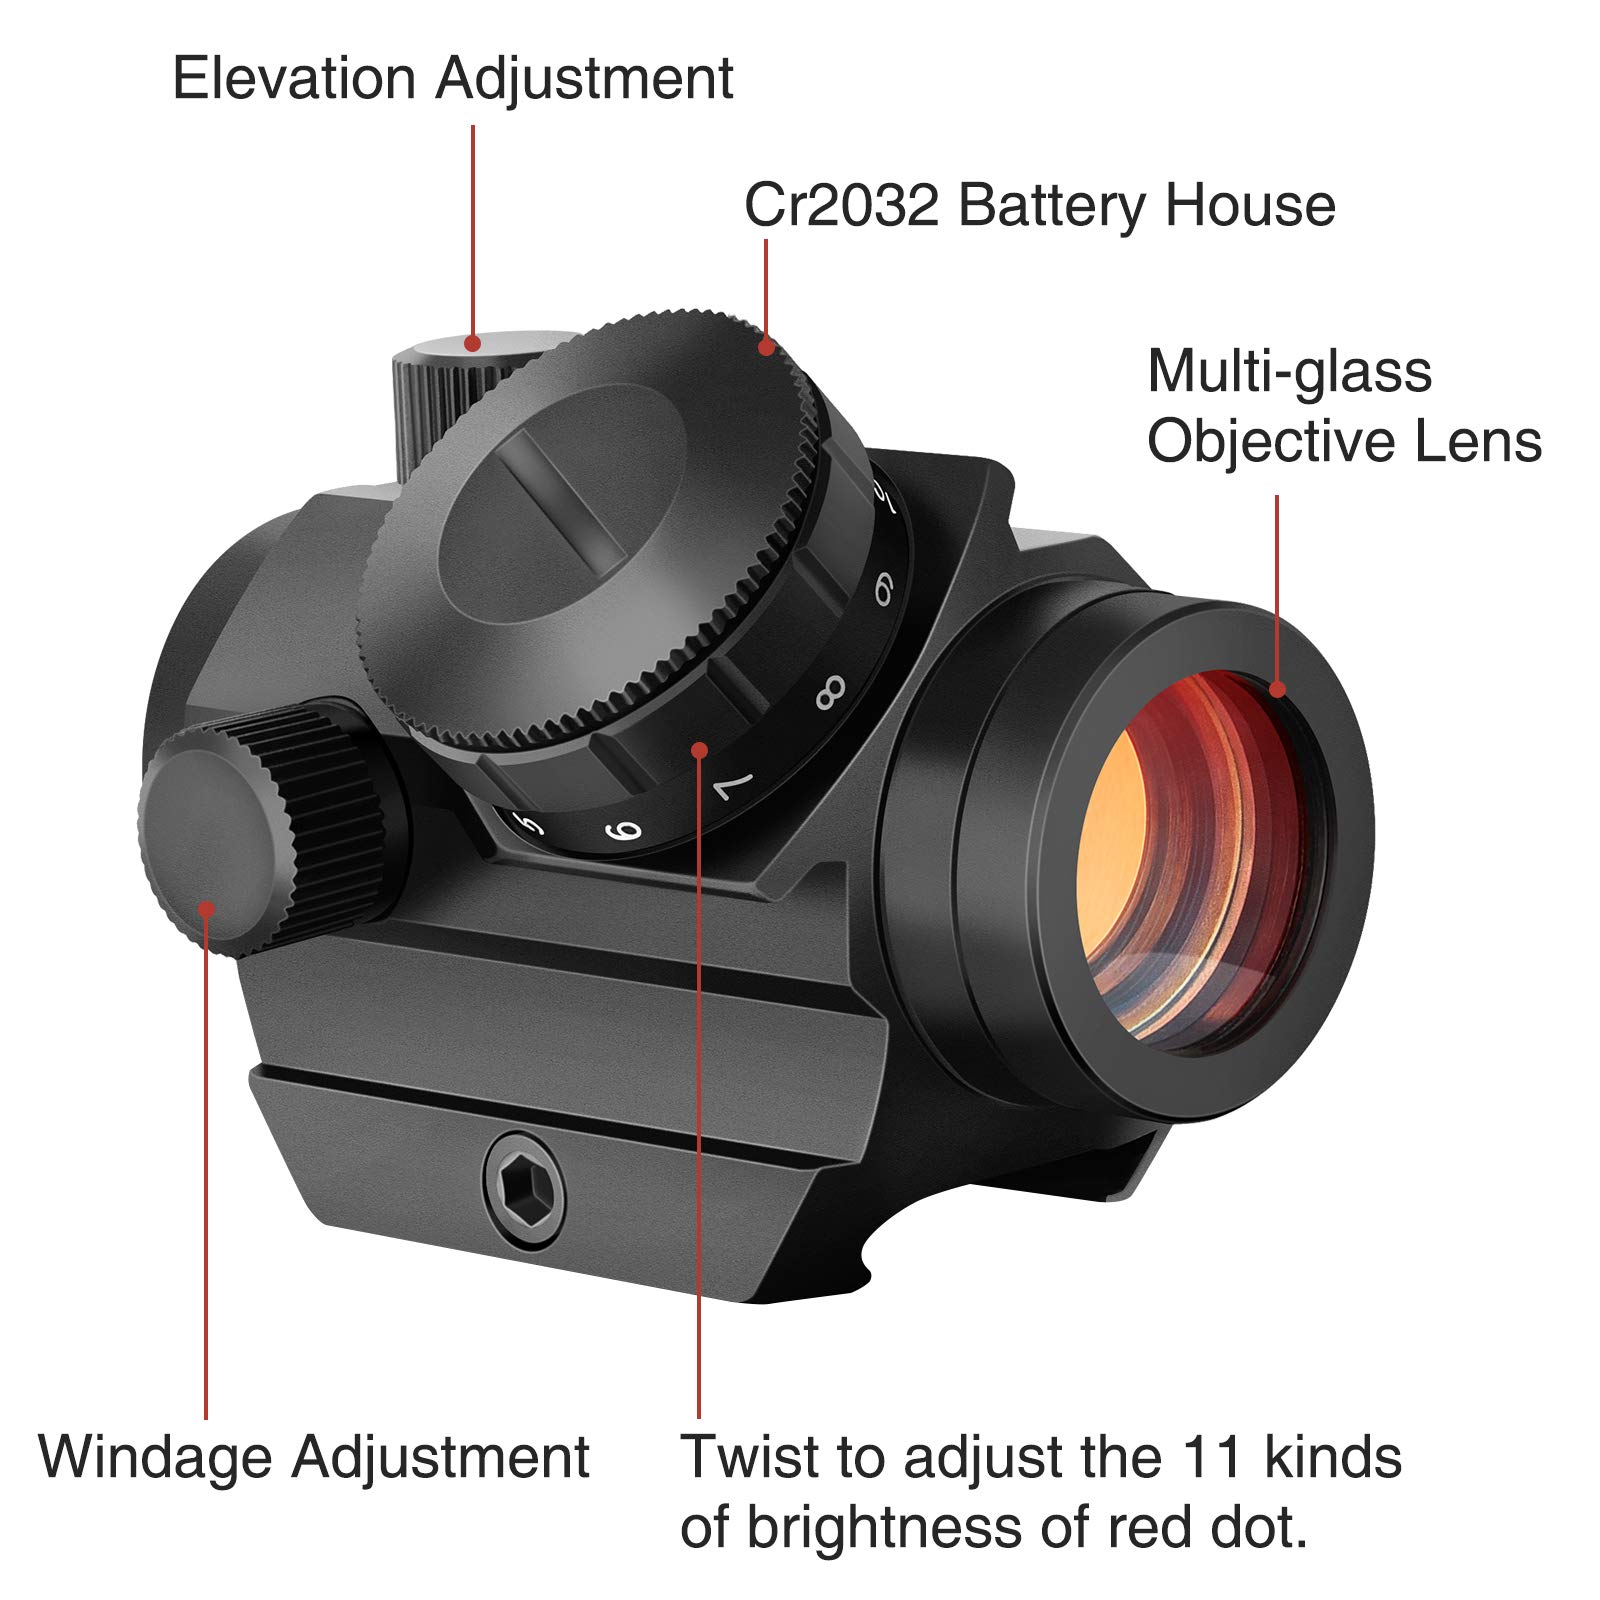 MidTen 2MOA Micro Red Dot Sight 1x25mm Reflex Sight Waterproof & Shockproof & Fog-Proof Red Dot Scope with 1 inch Riser Mount